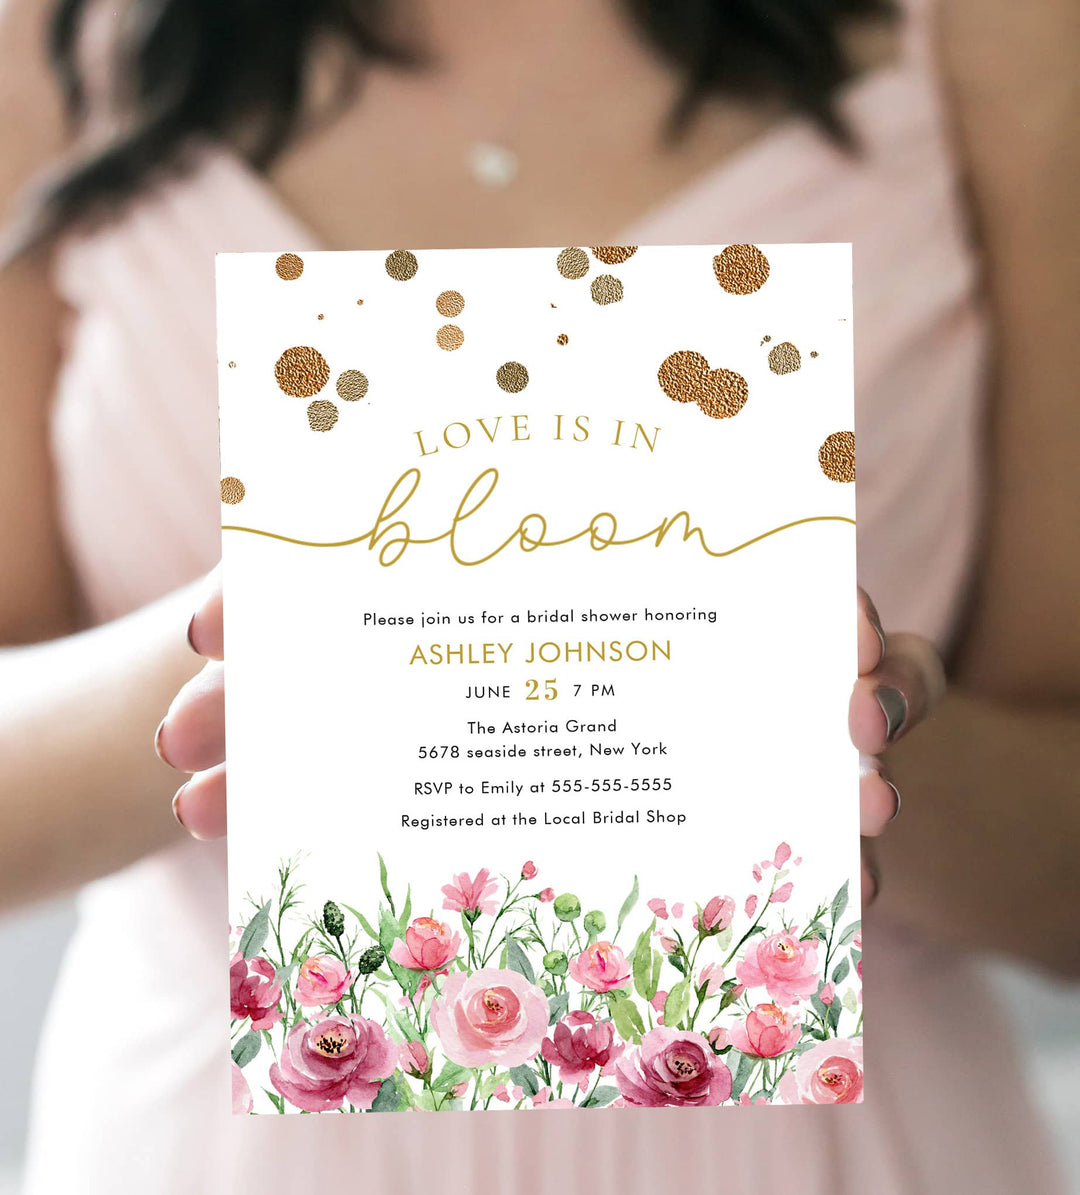 LOVE IS IN BLOOM Bridal Shower Invitation